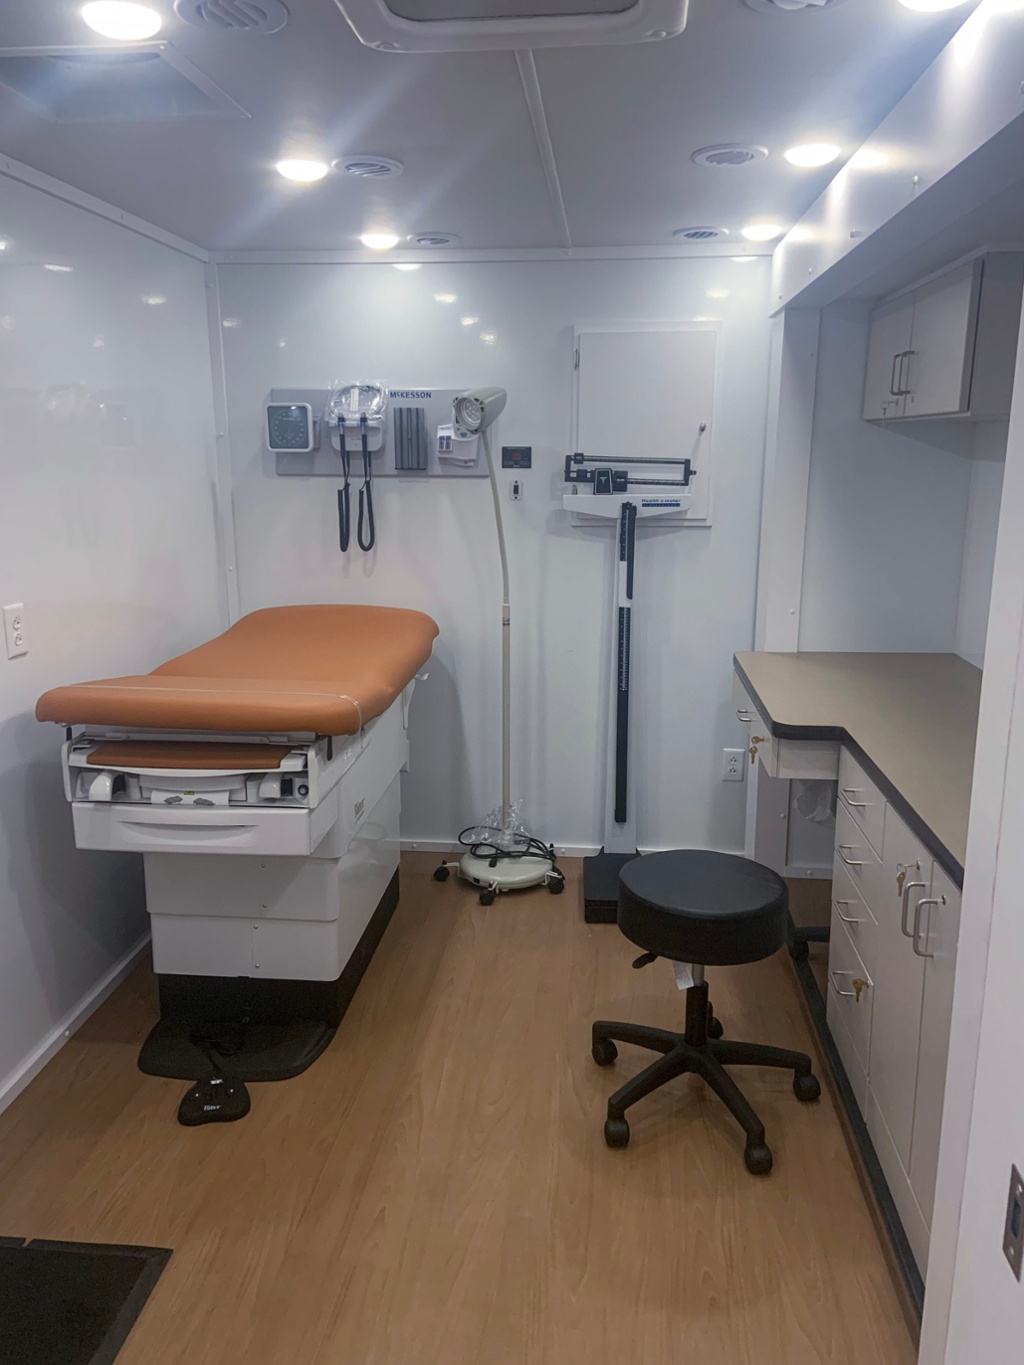 SIHF Mobile Healthcare imaging trailers